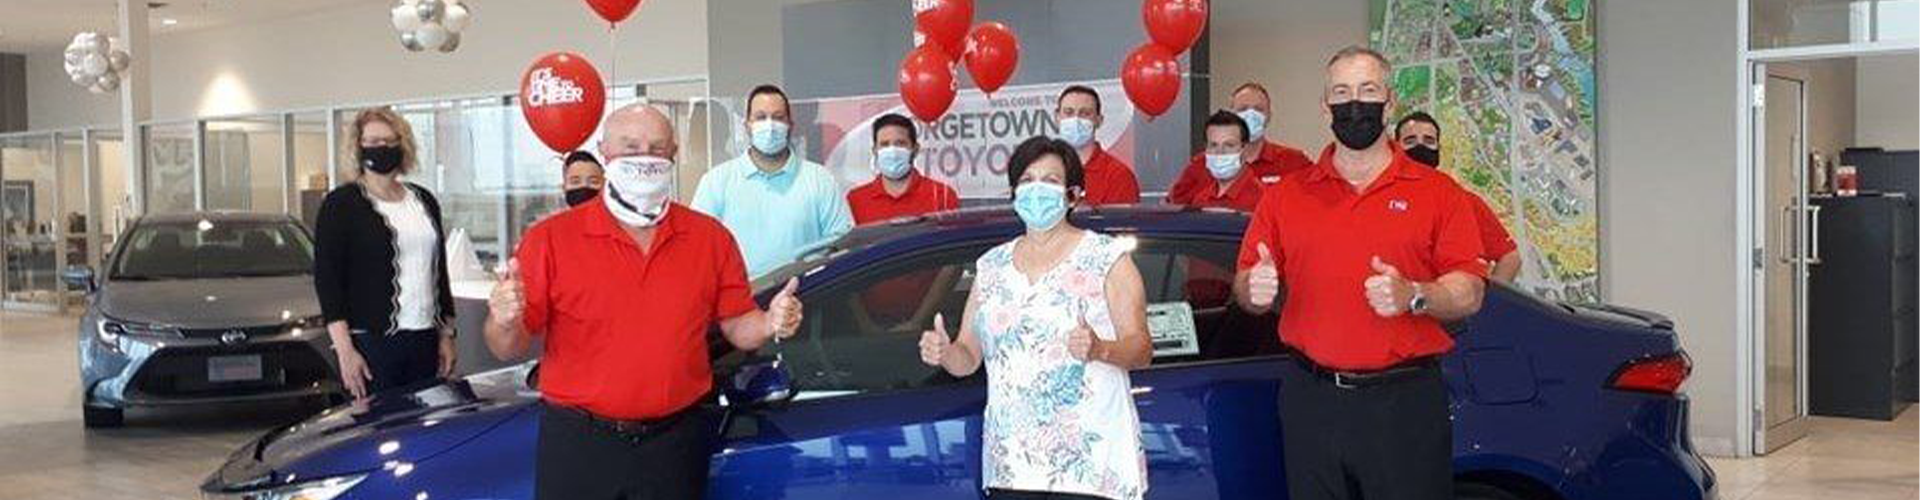 Georgetown Toyota Celebrates 25 Years In The Community